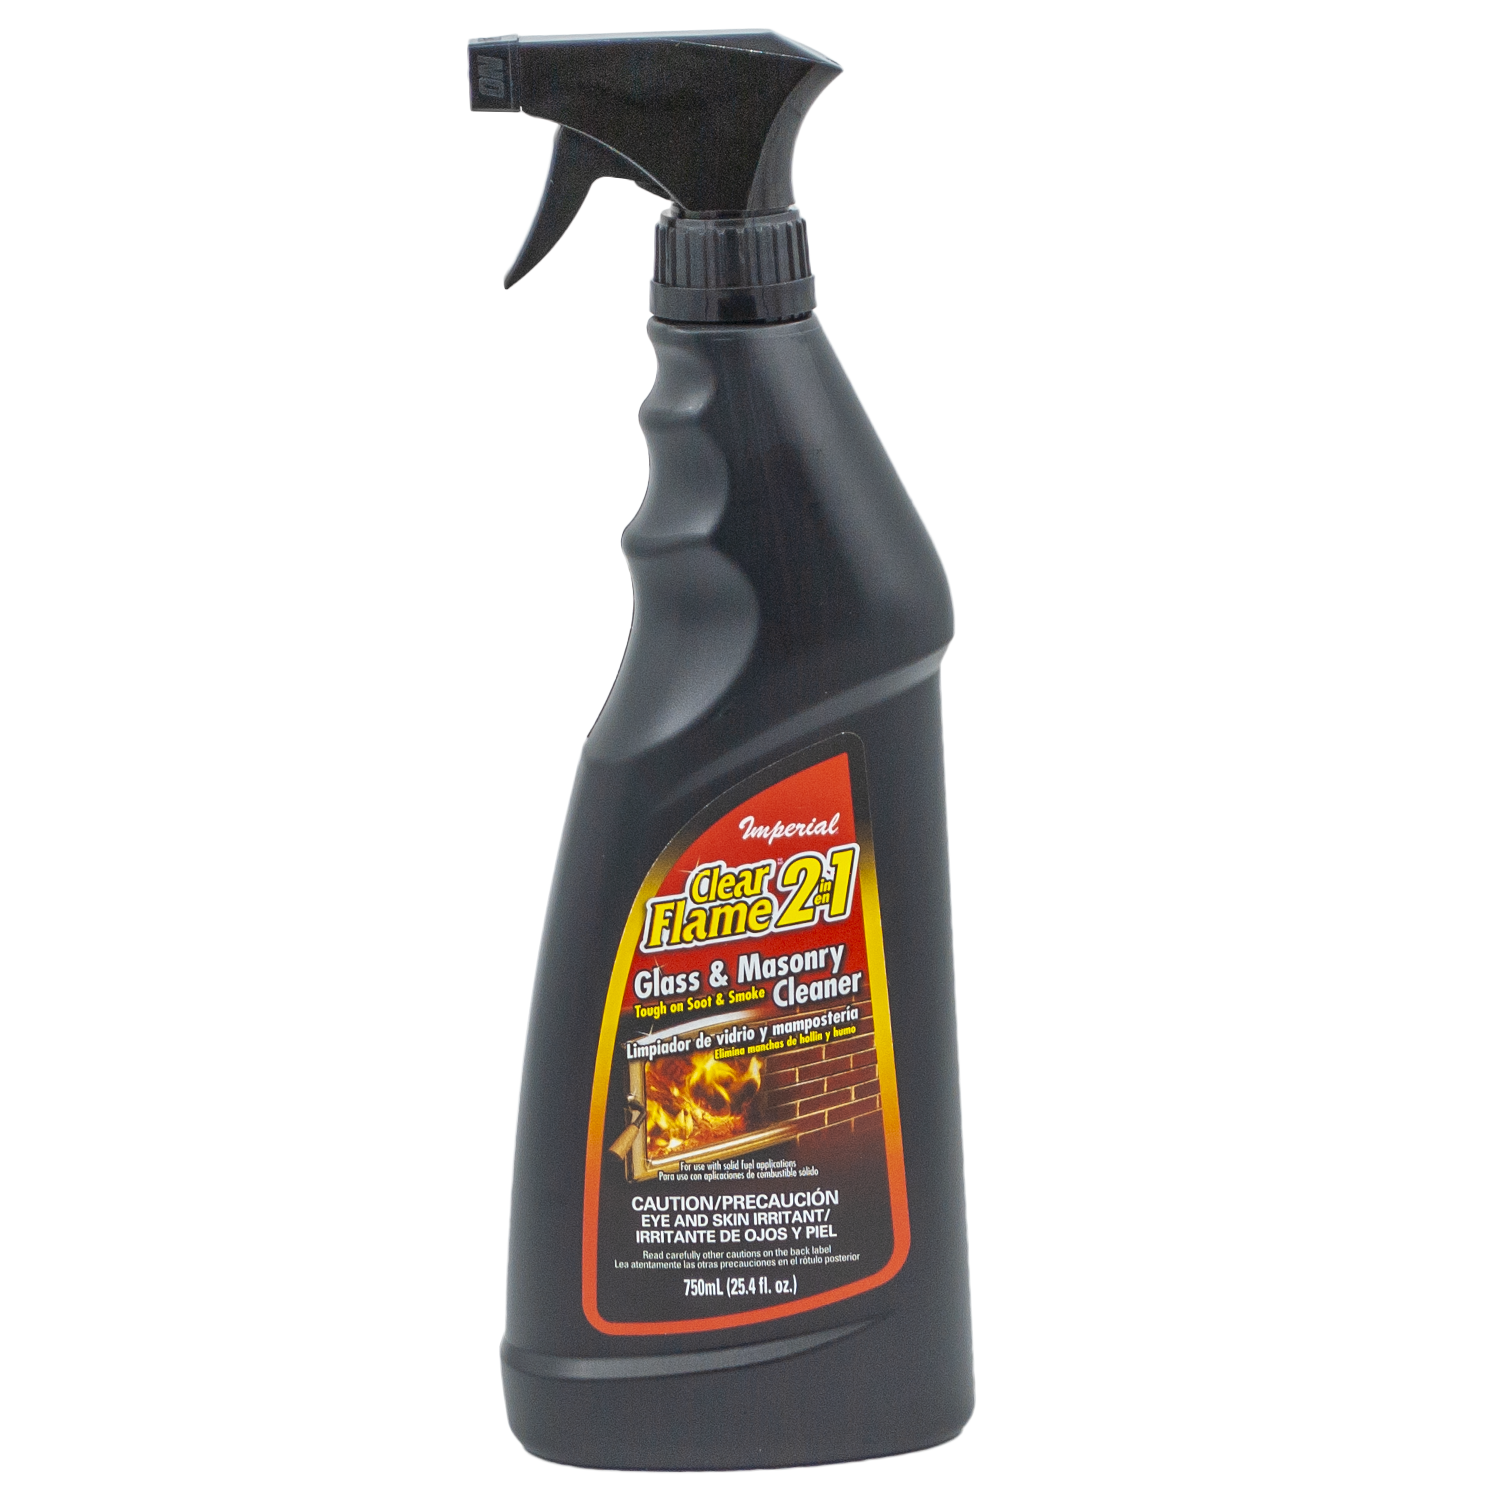 Stove glass cleaner Fireplace Maintenance at Lowes.com